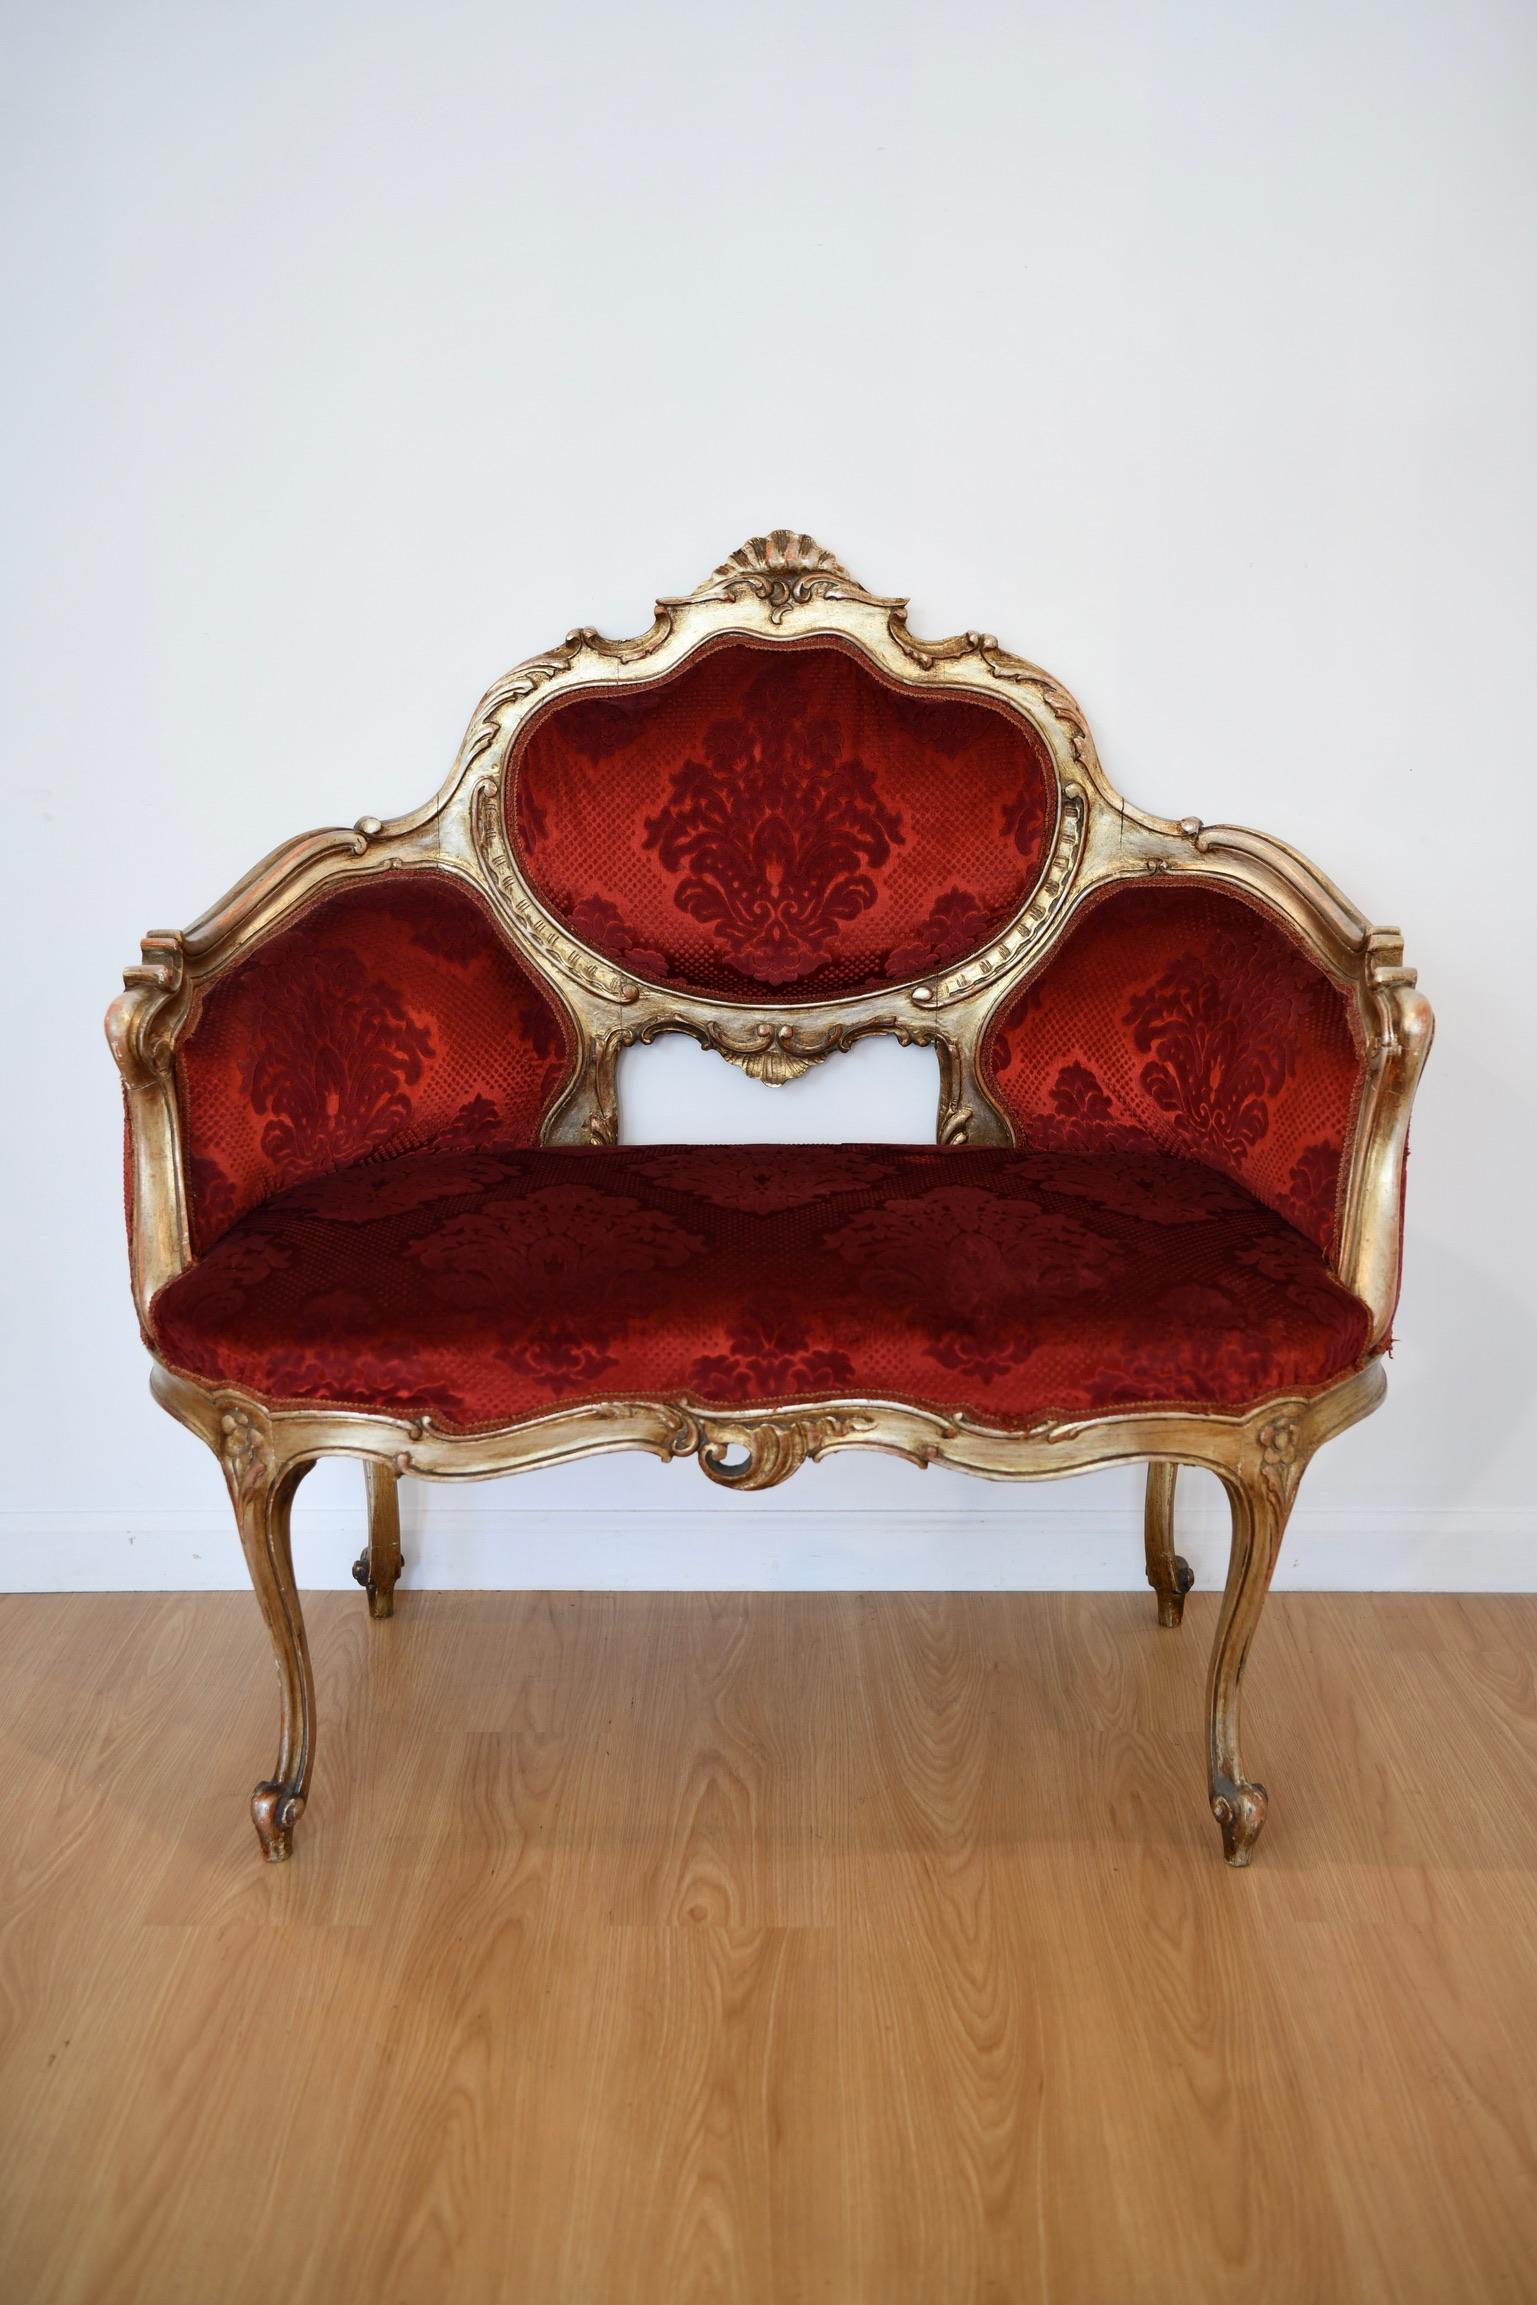 Antique Italian crimson velvet upholstered settee with gilt frame. Some fraying to upholstery trim; otherwise in good vintage condition. Dimensions: 42